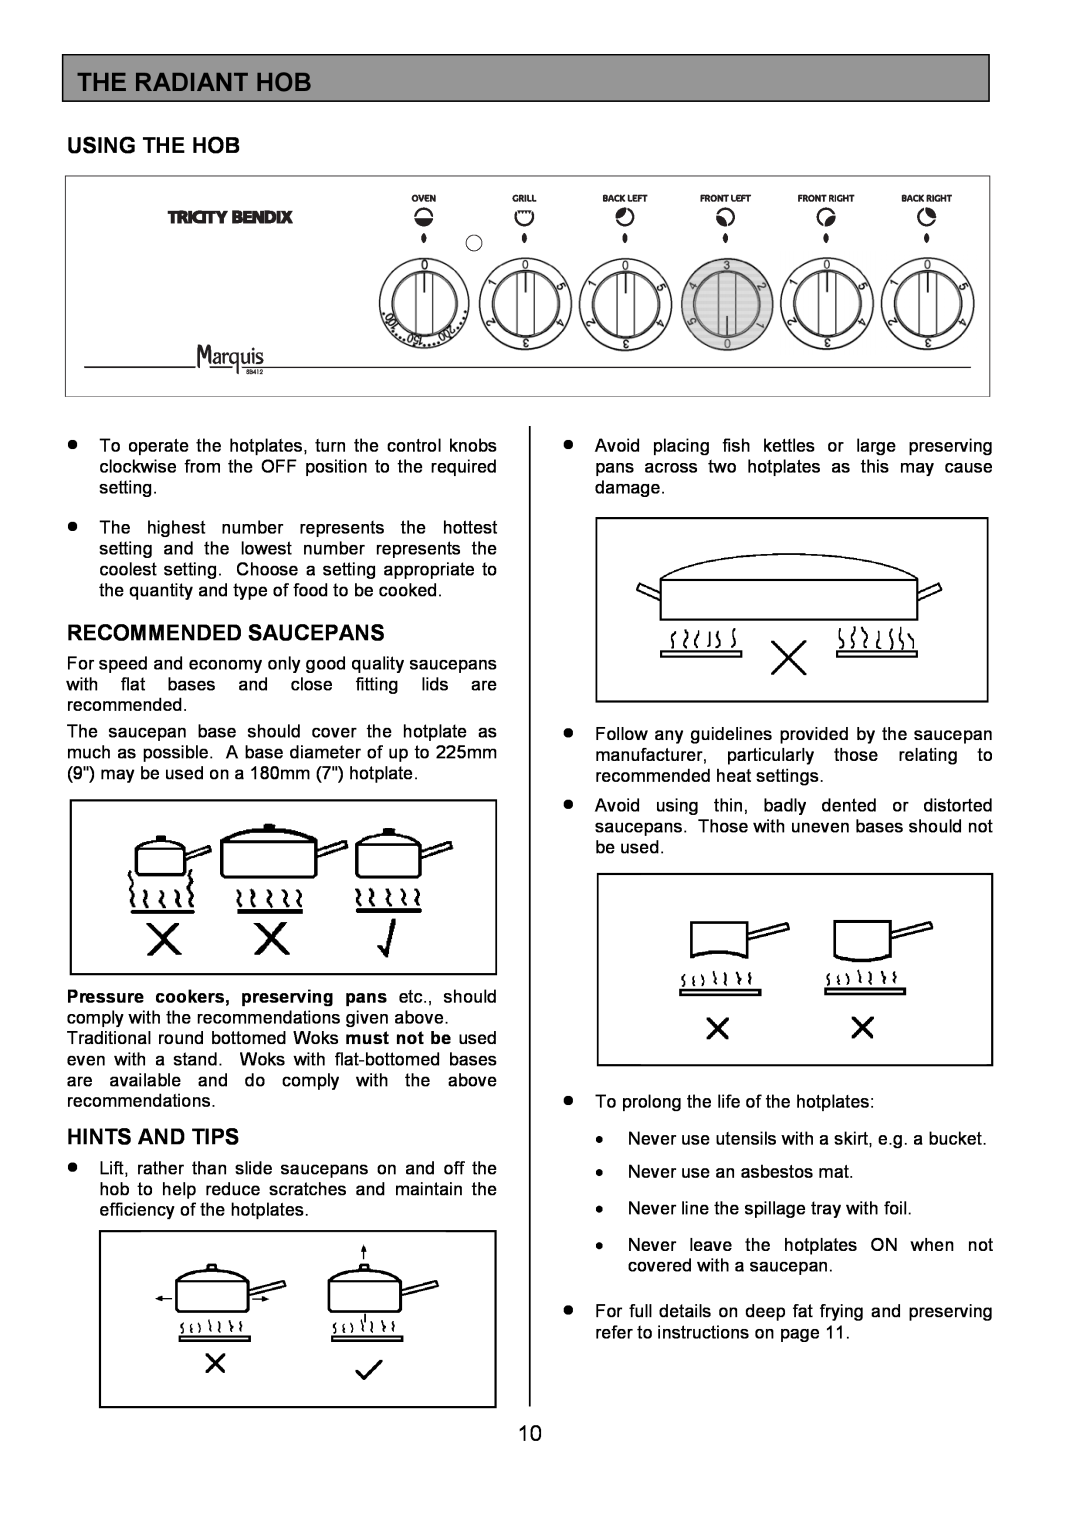 Tricity Bendix SB412 installation instructions The Radiant Hob, Using The Hob, Recommended Saucepans, Hints And Tips 